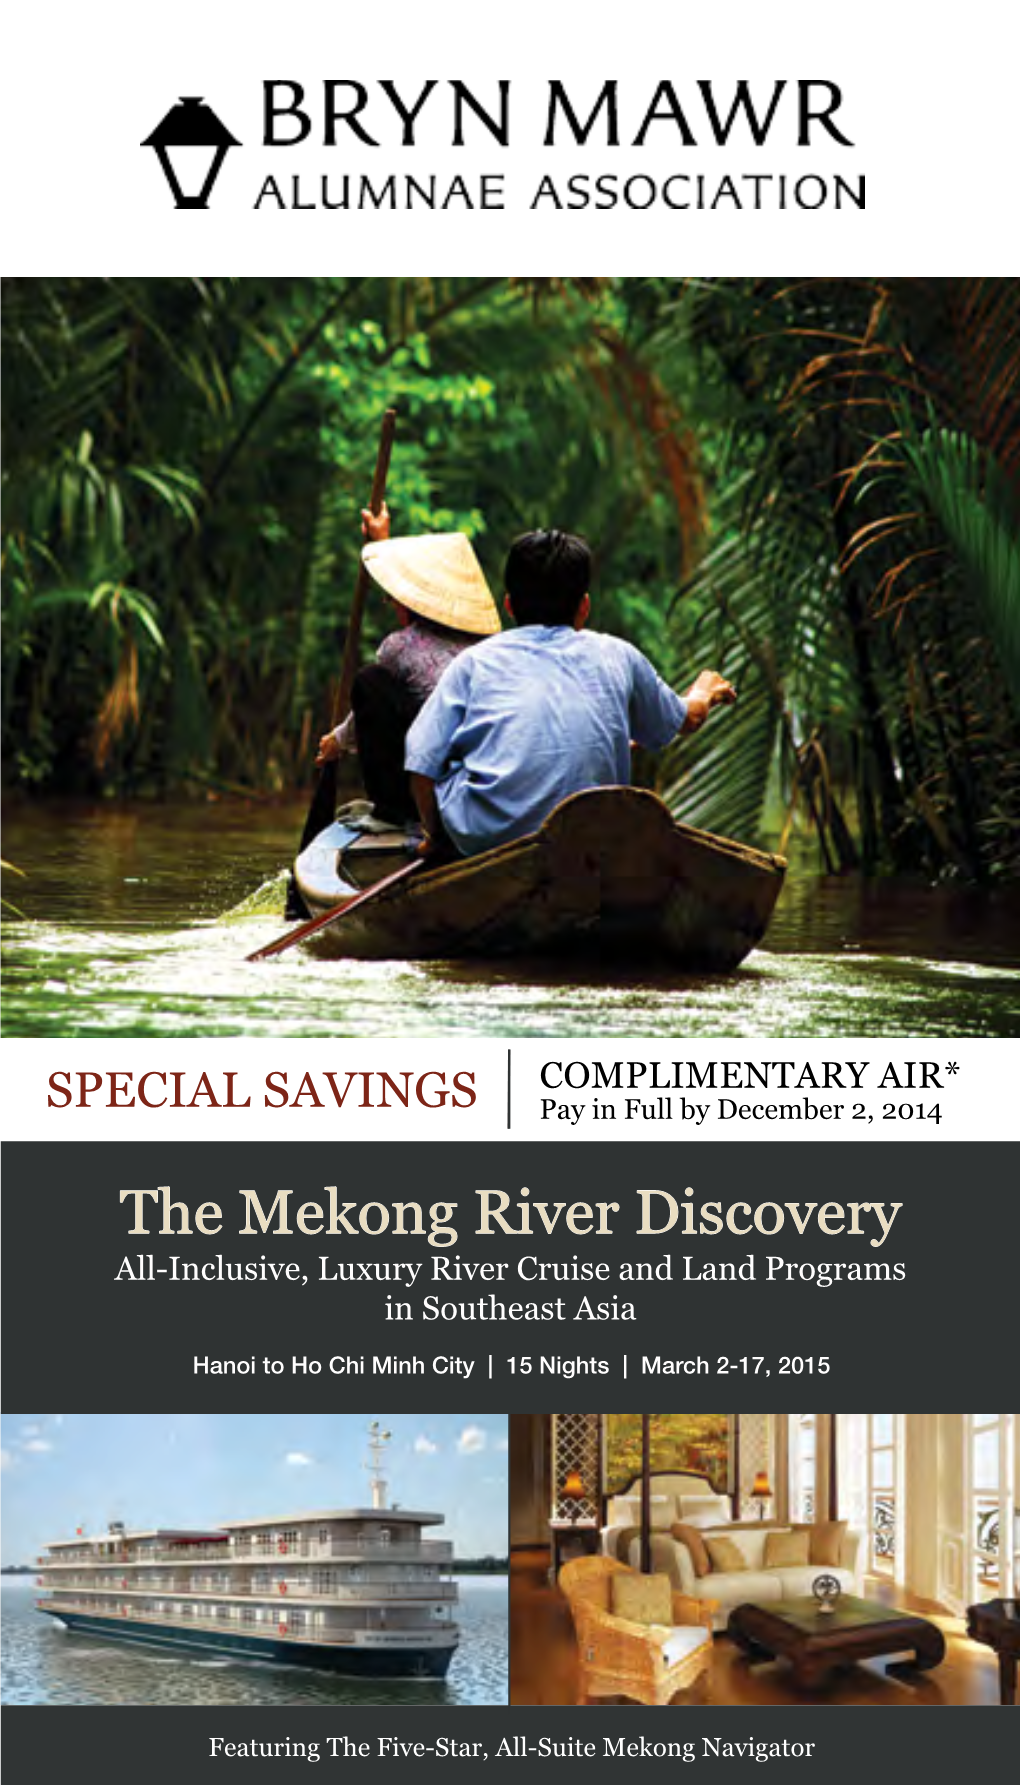 The Mekong River Discovery All-Inclusive, Luxury River Cruise and Land Programs in Southeast Asia